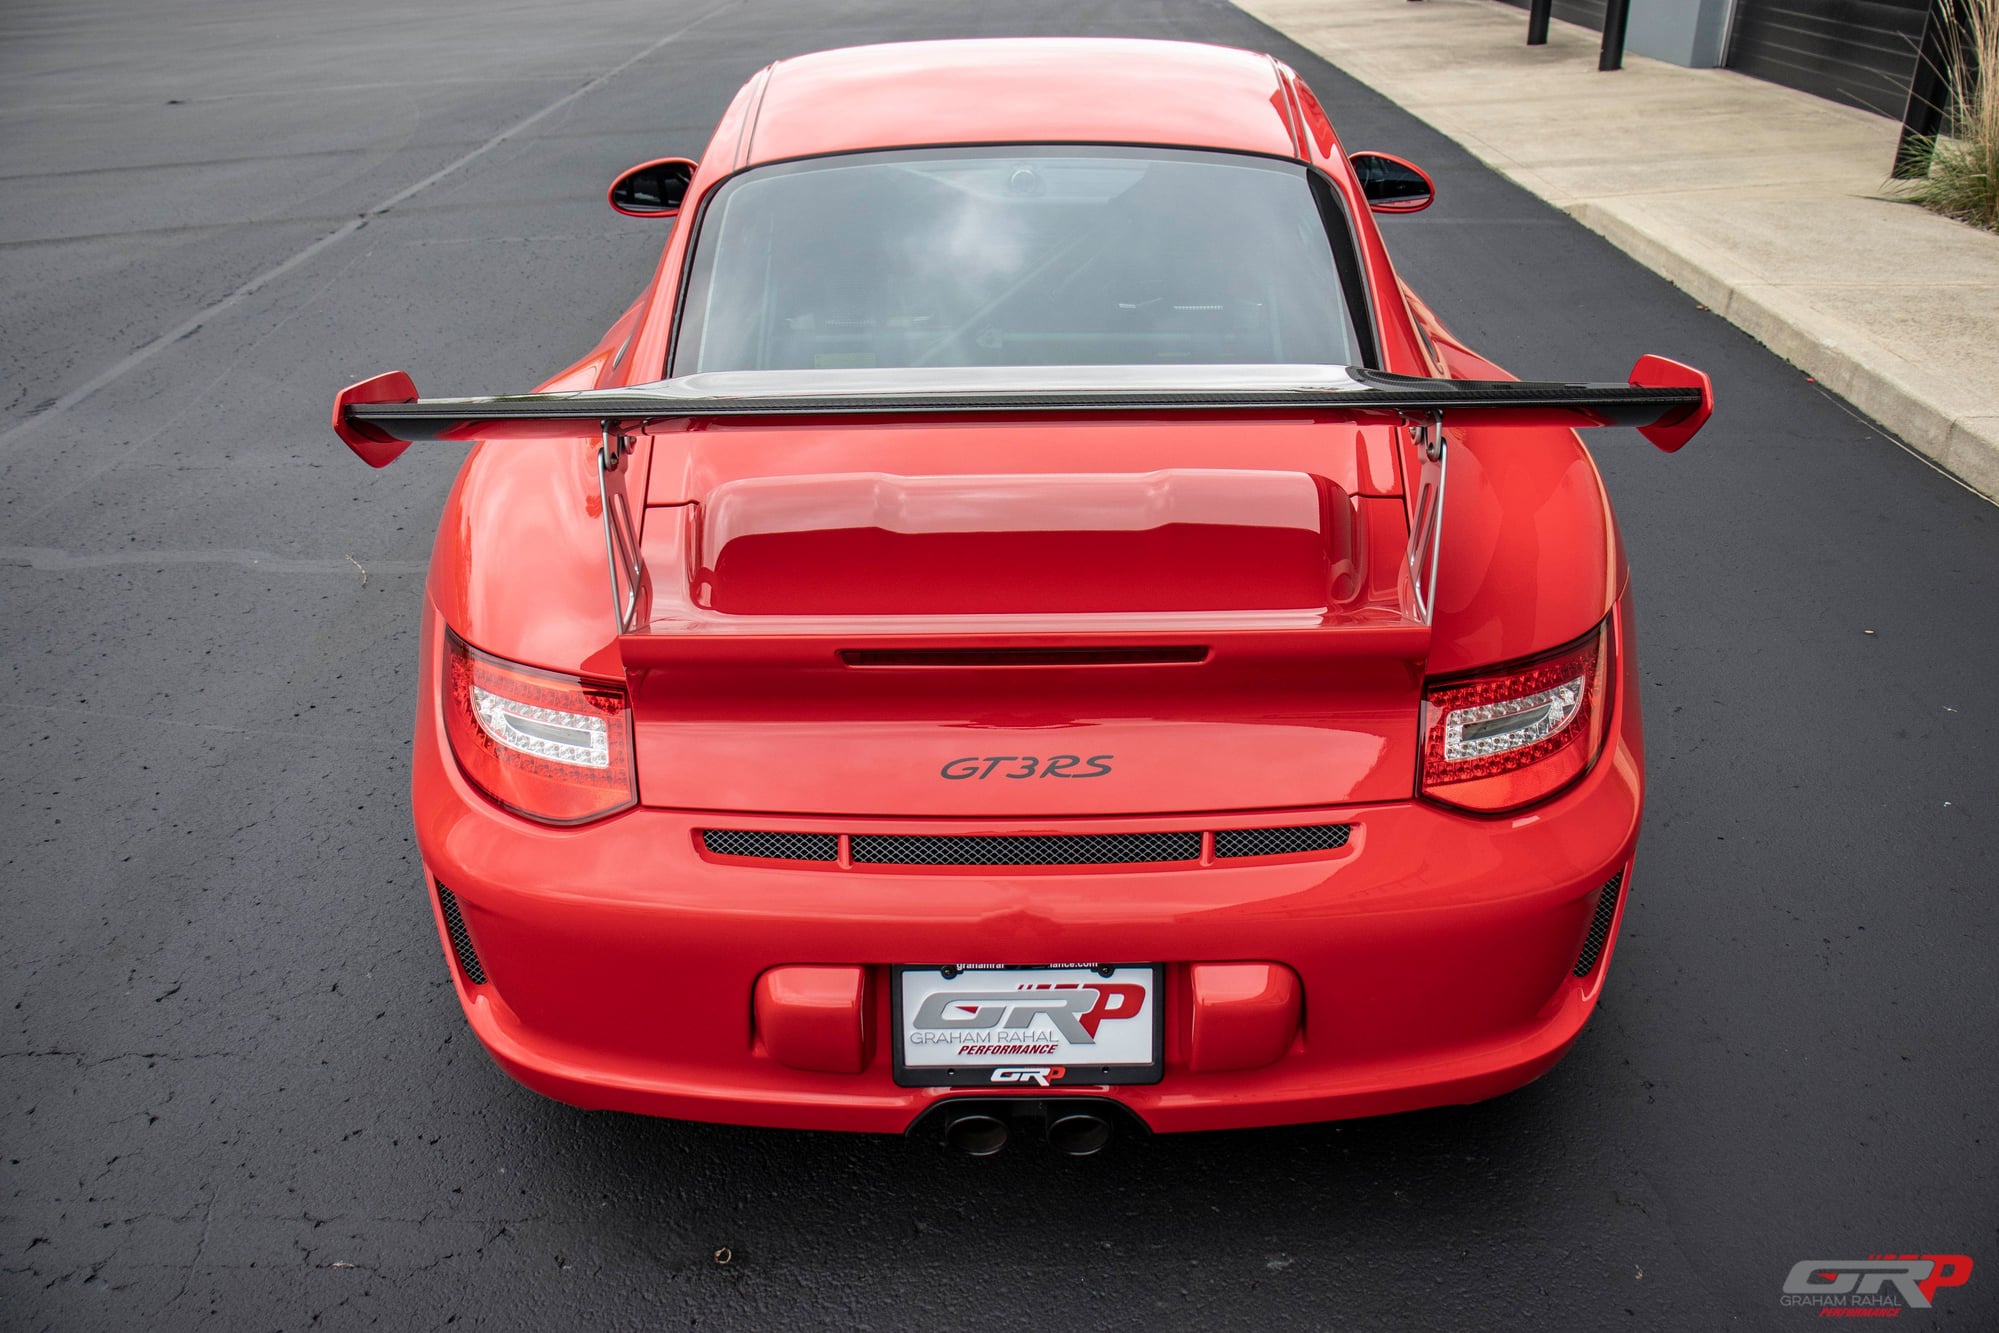 2011 Porsche 911 - 2011 Porsche 911 GT3RS - PTS Guards Red - Used - VIN WP0AC2A94BS783237 - 19,321 Miles - 6 cyl - 2WD - Manual - Coupe - Red - Brownsburg, IN 46112, United States